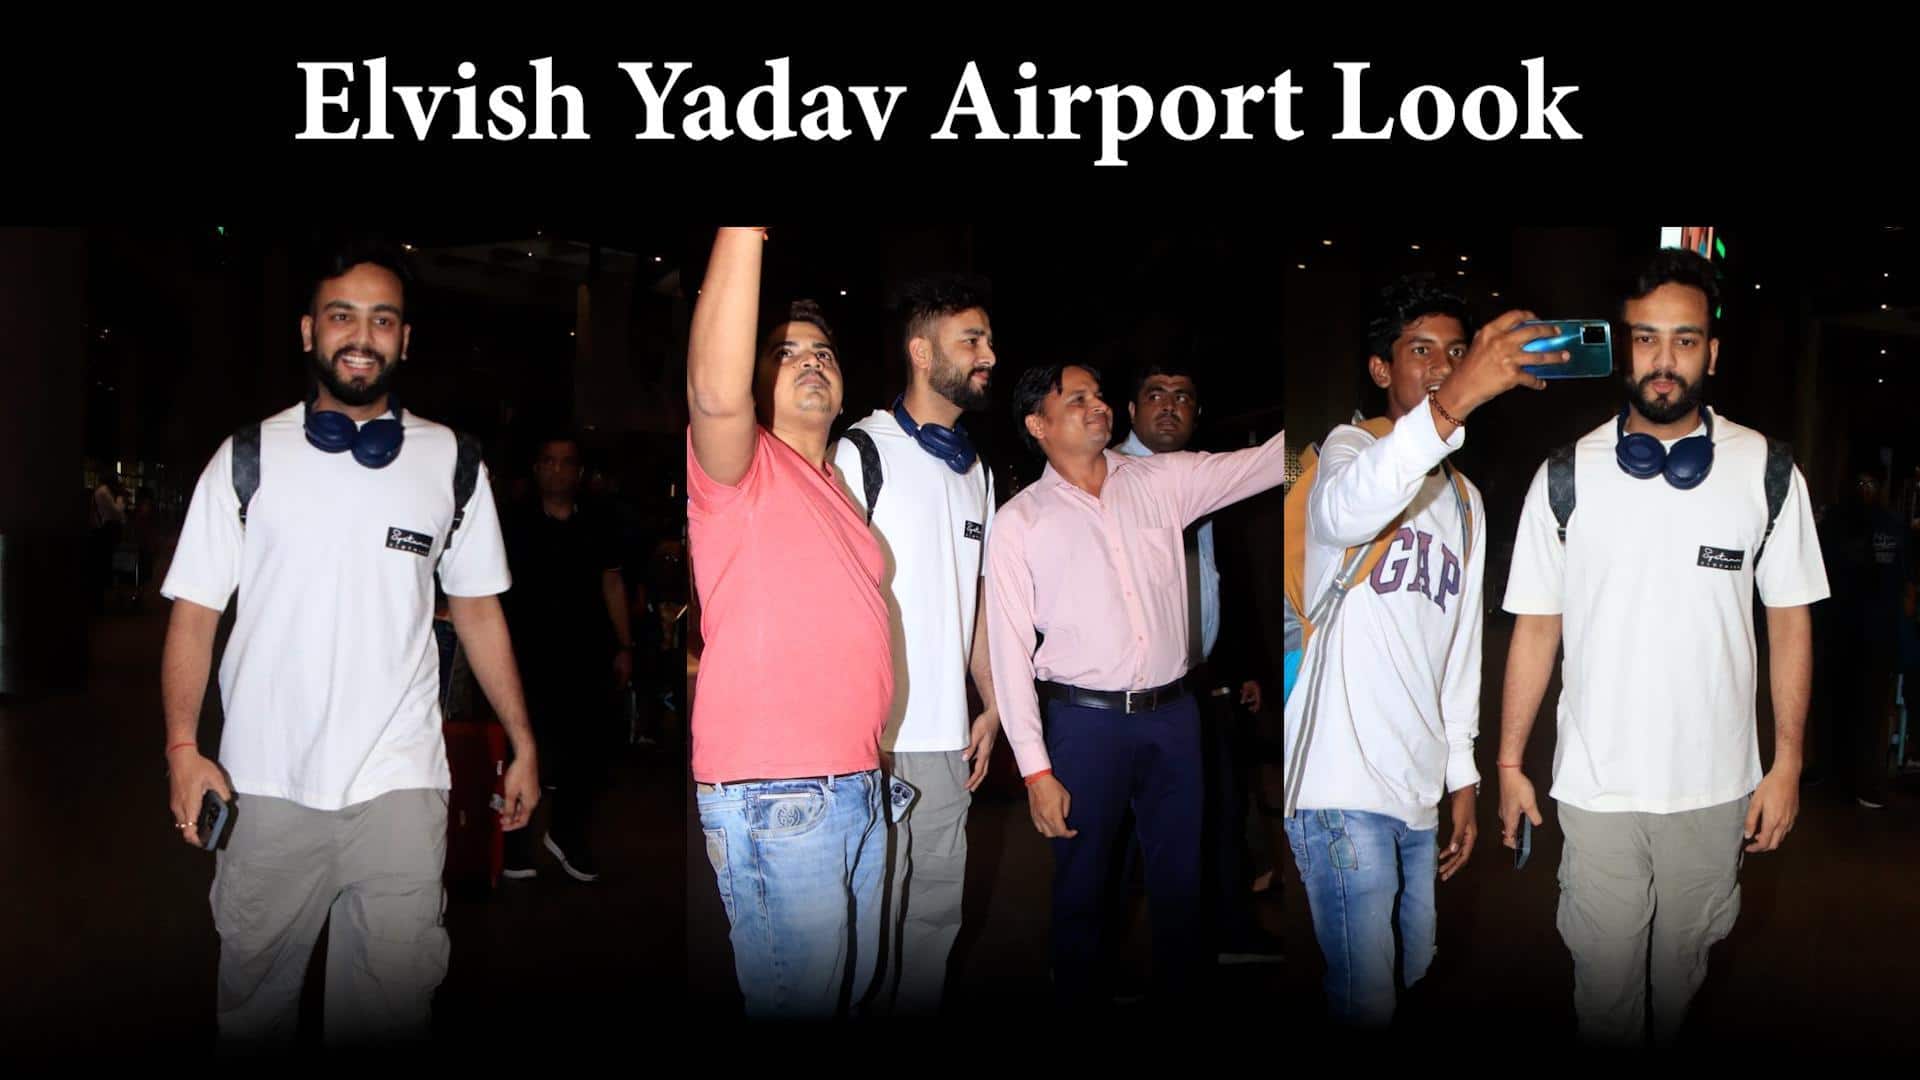 Amid snake venom controversy, Elvish Yadav goes for a simple airport look [watch]